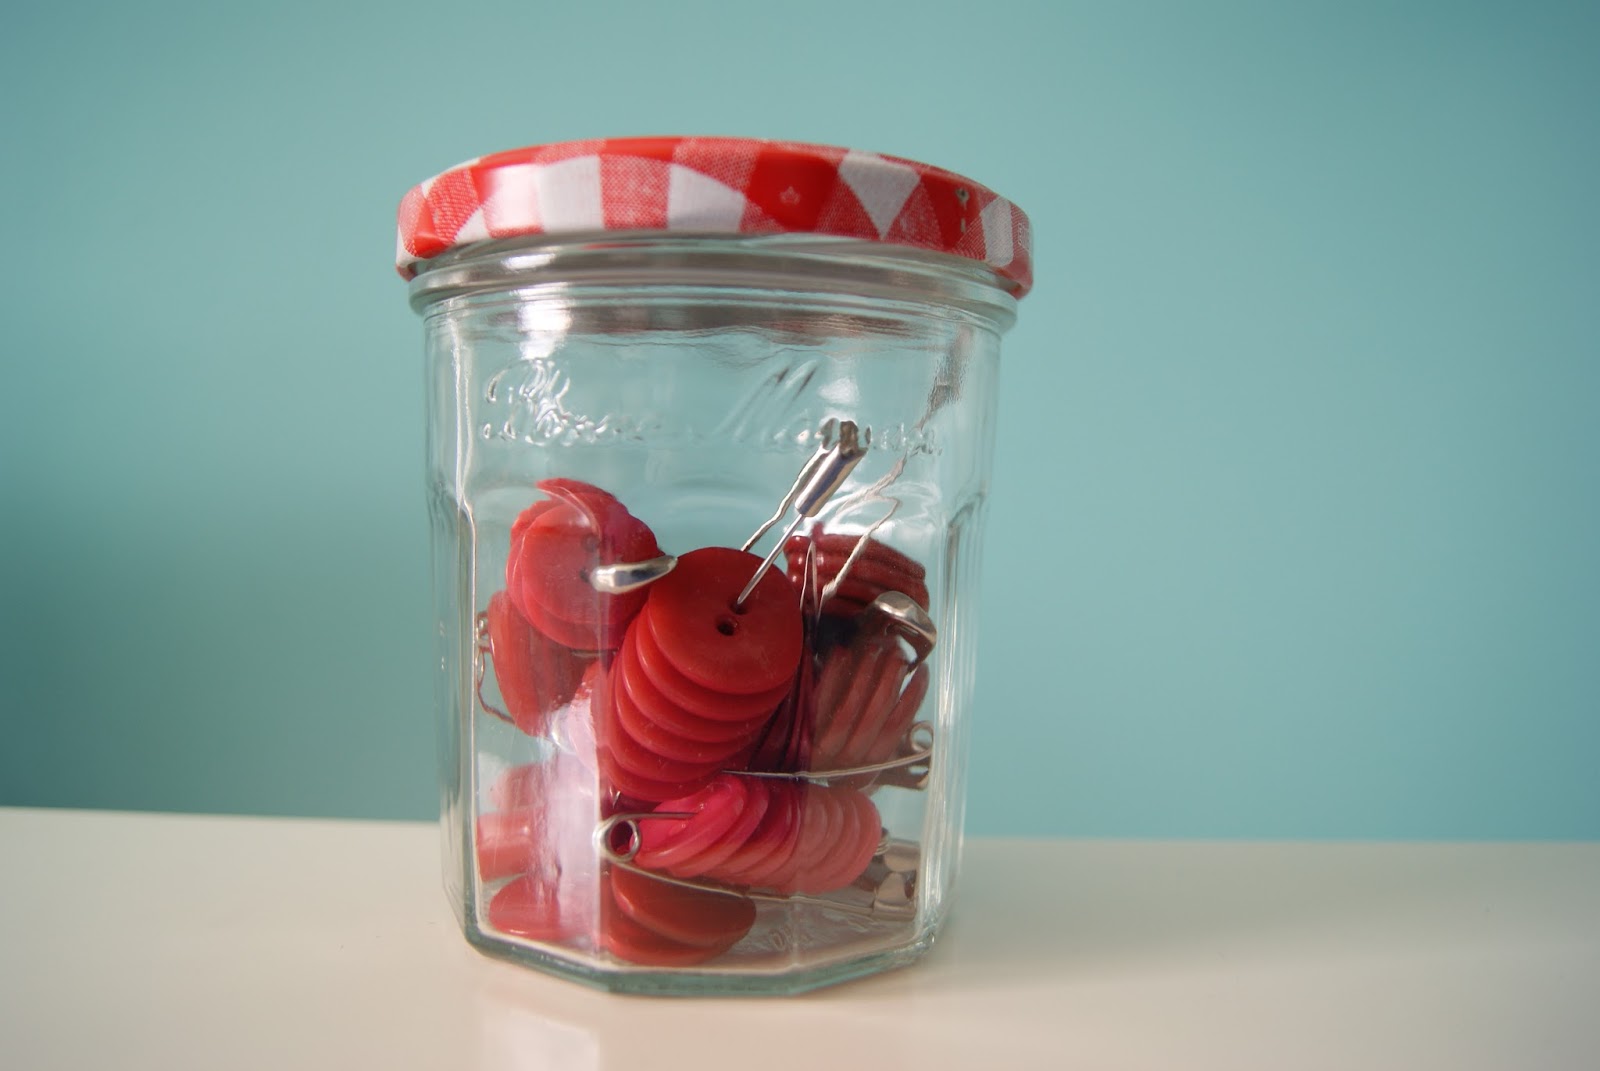 button storage on large safety pins, all same color buttons in one jar by nest full of eggs